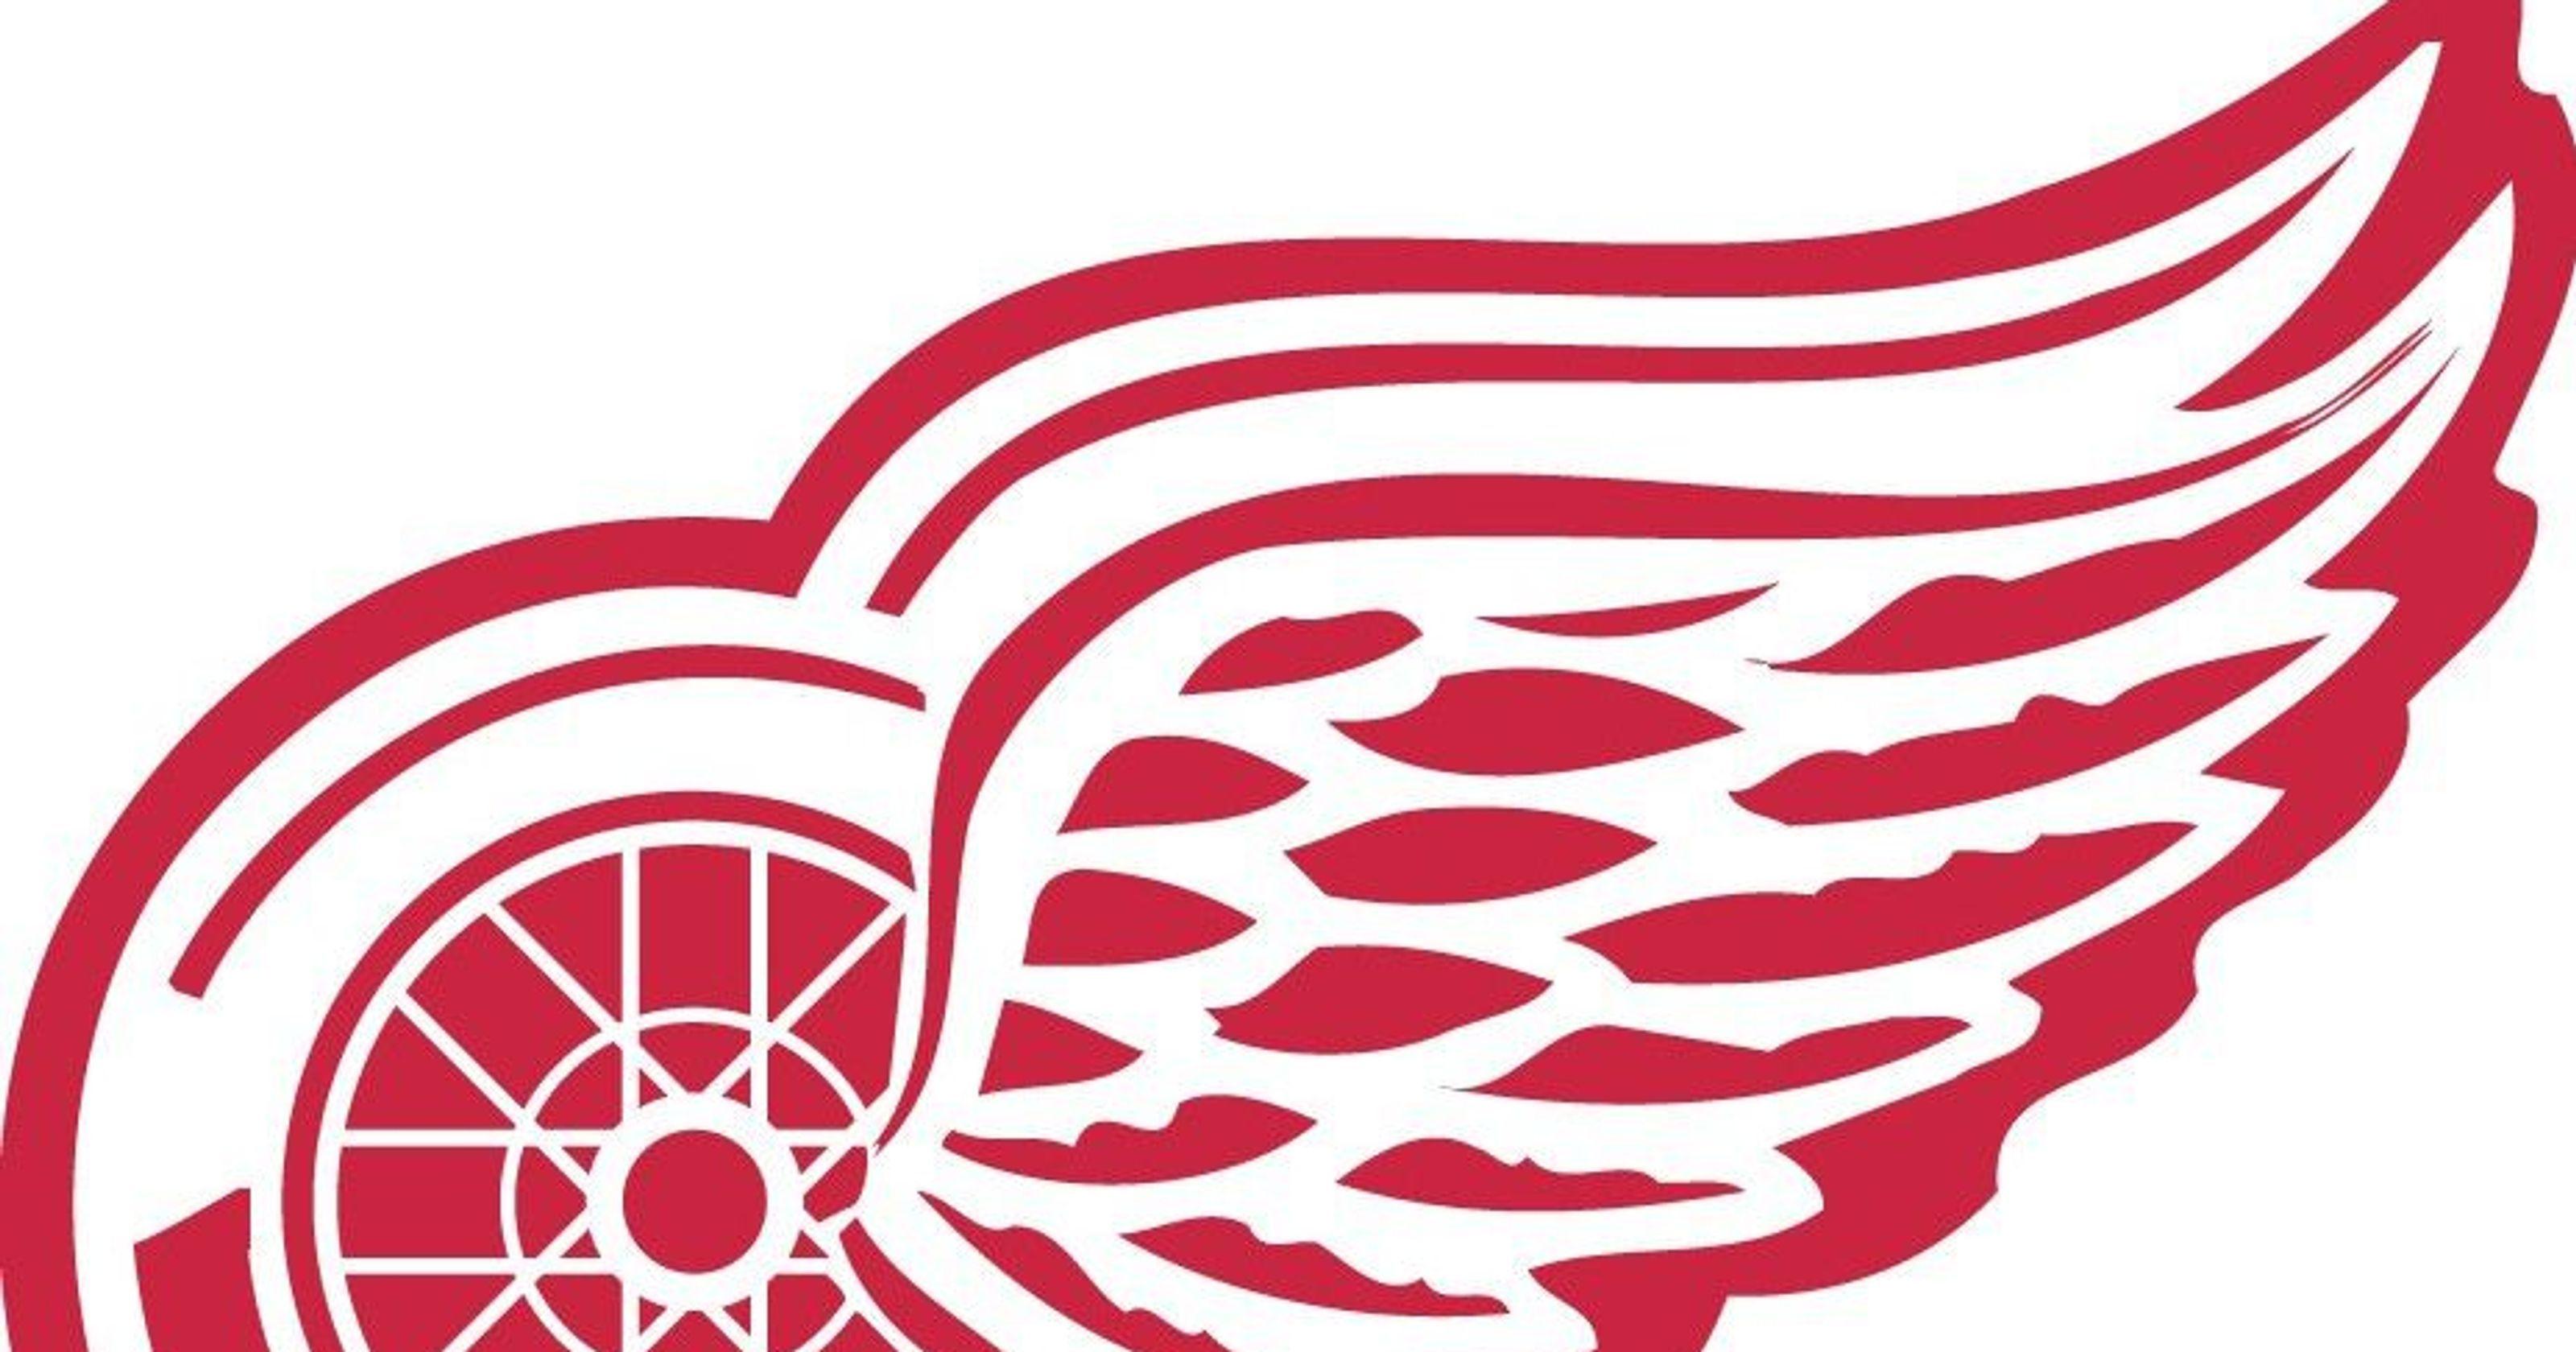 Red Wings Logo - Why did white nationalists use the Detroit Red Wings logo?